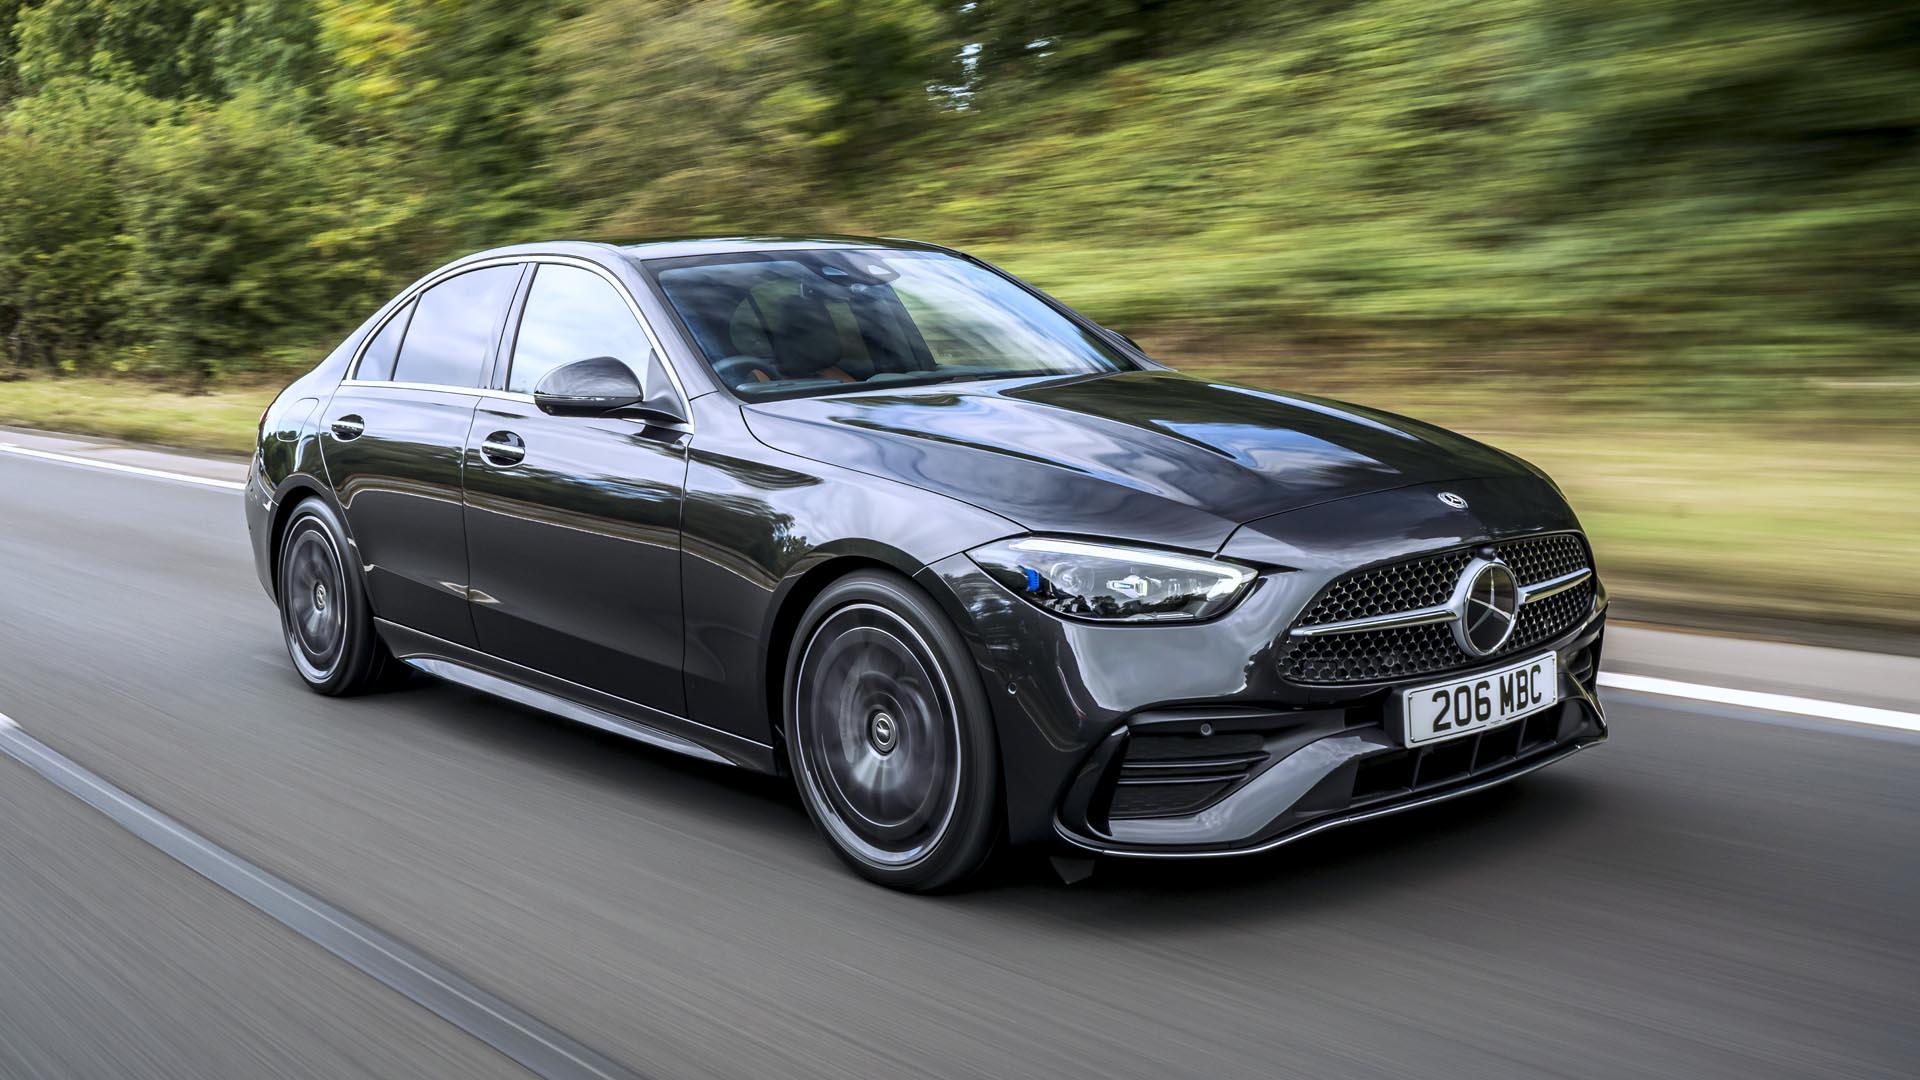 Mercedes-Benz C Class AMG S Night Edition image